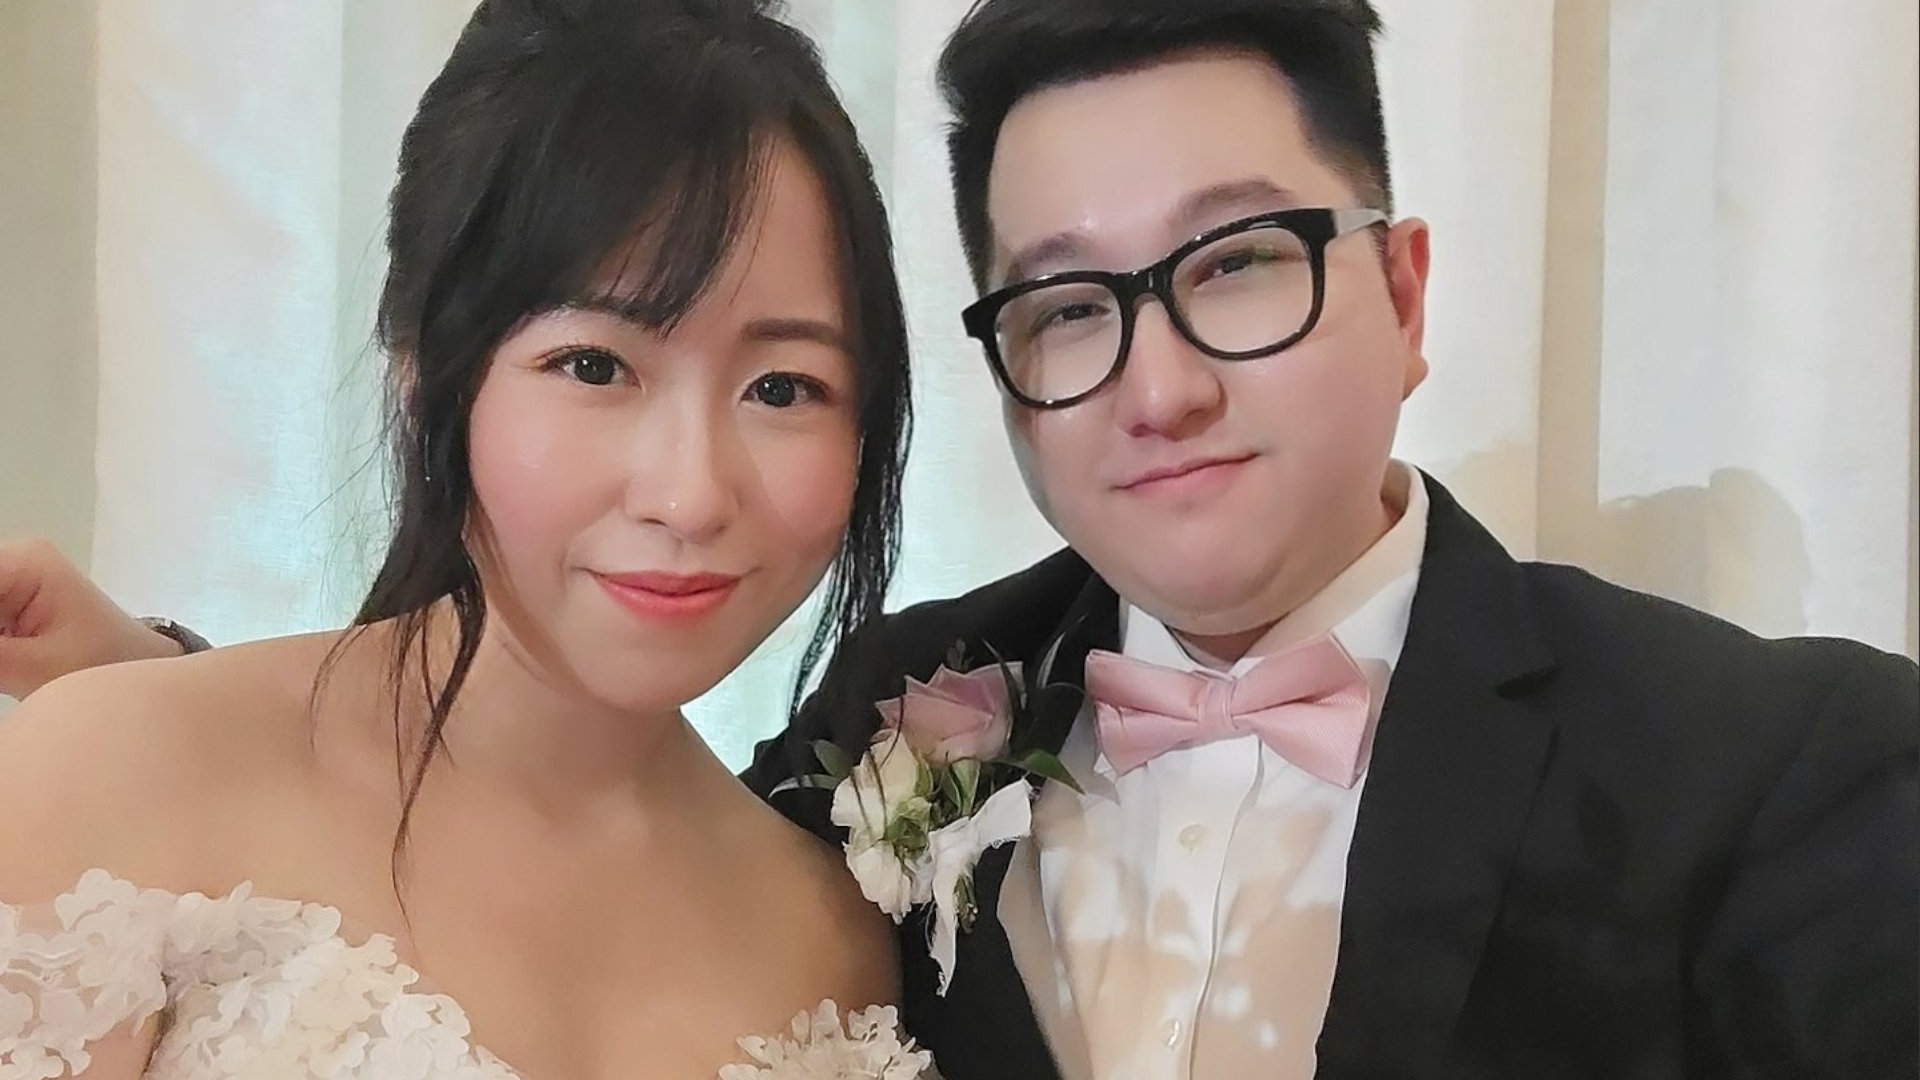 Two streamers are getting married live on Twitch and 60,000 people are watching - will this be the new trend?